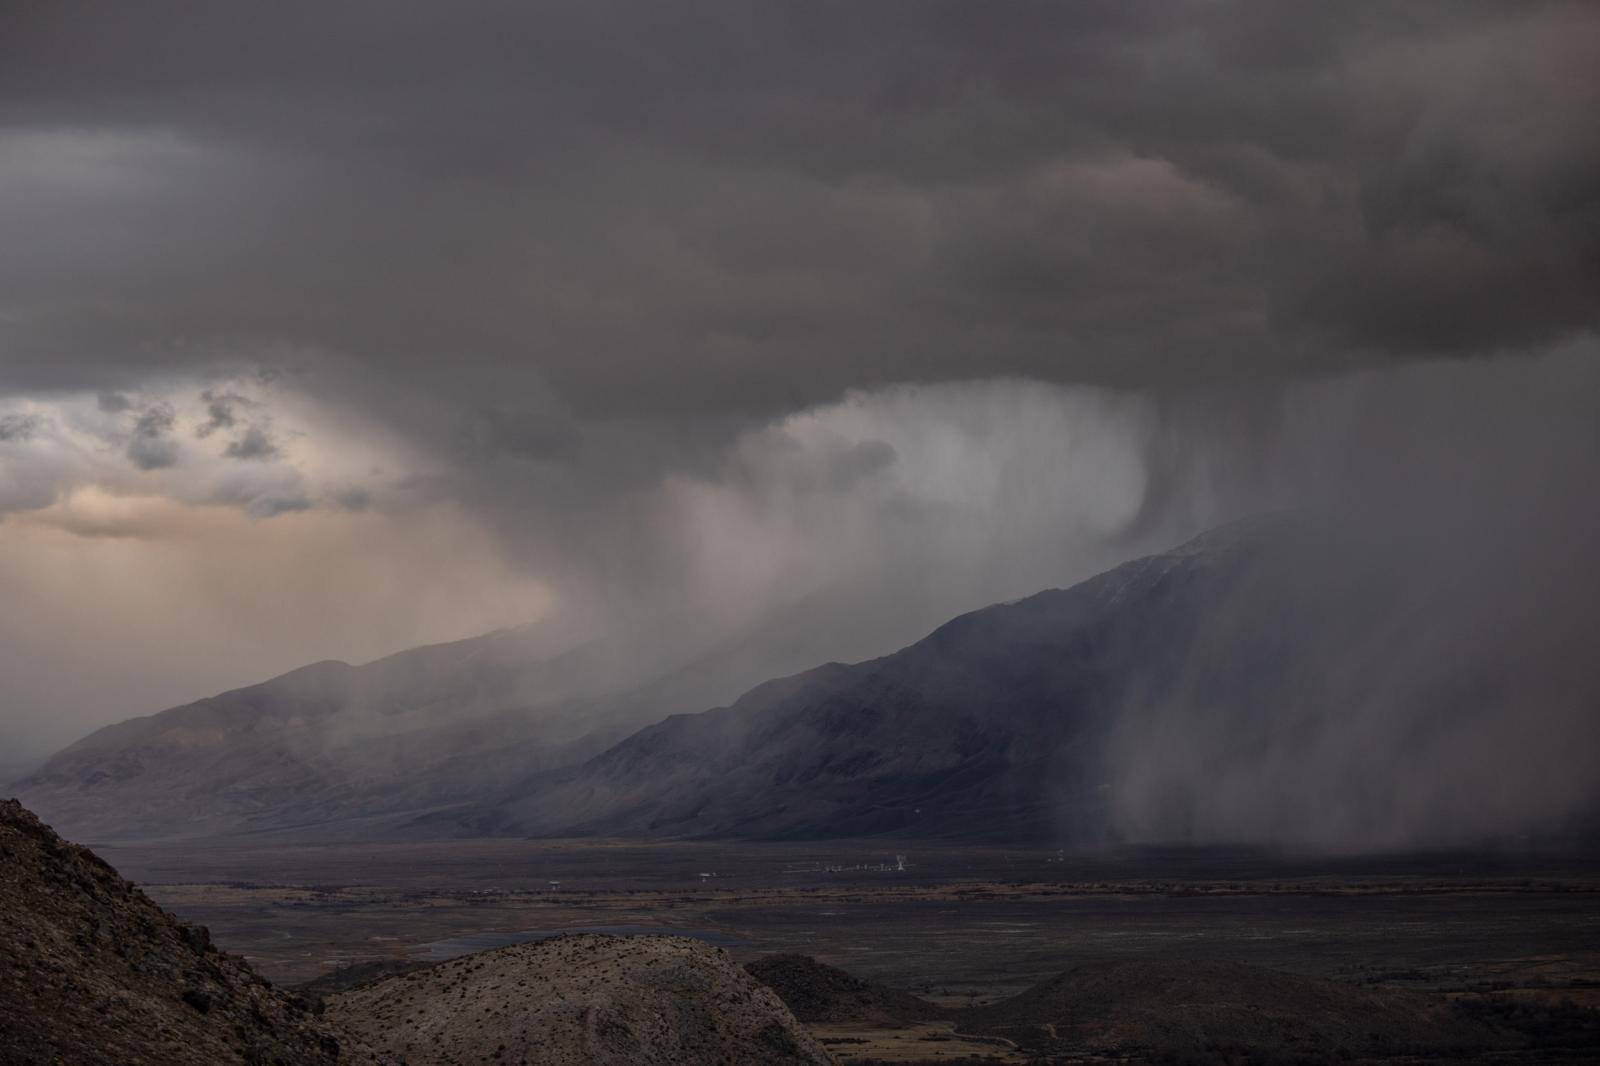 A winter storm comes cross from...e. Easten Sierras/ Ownes valley